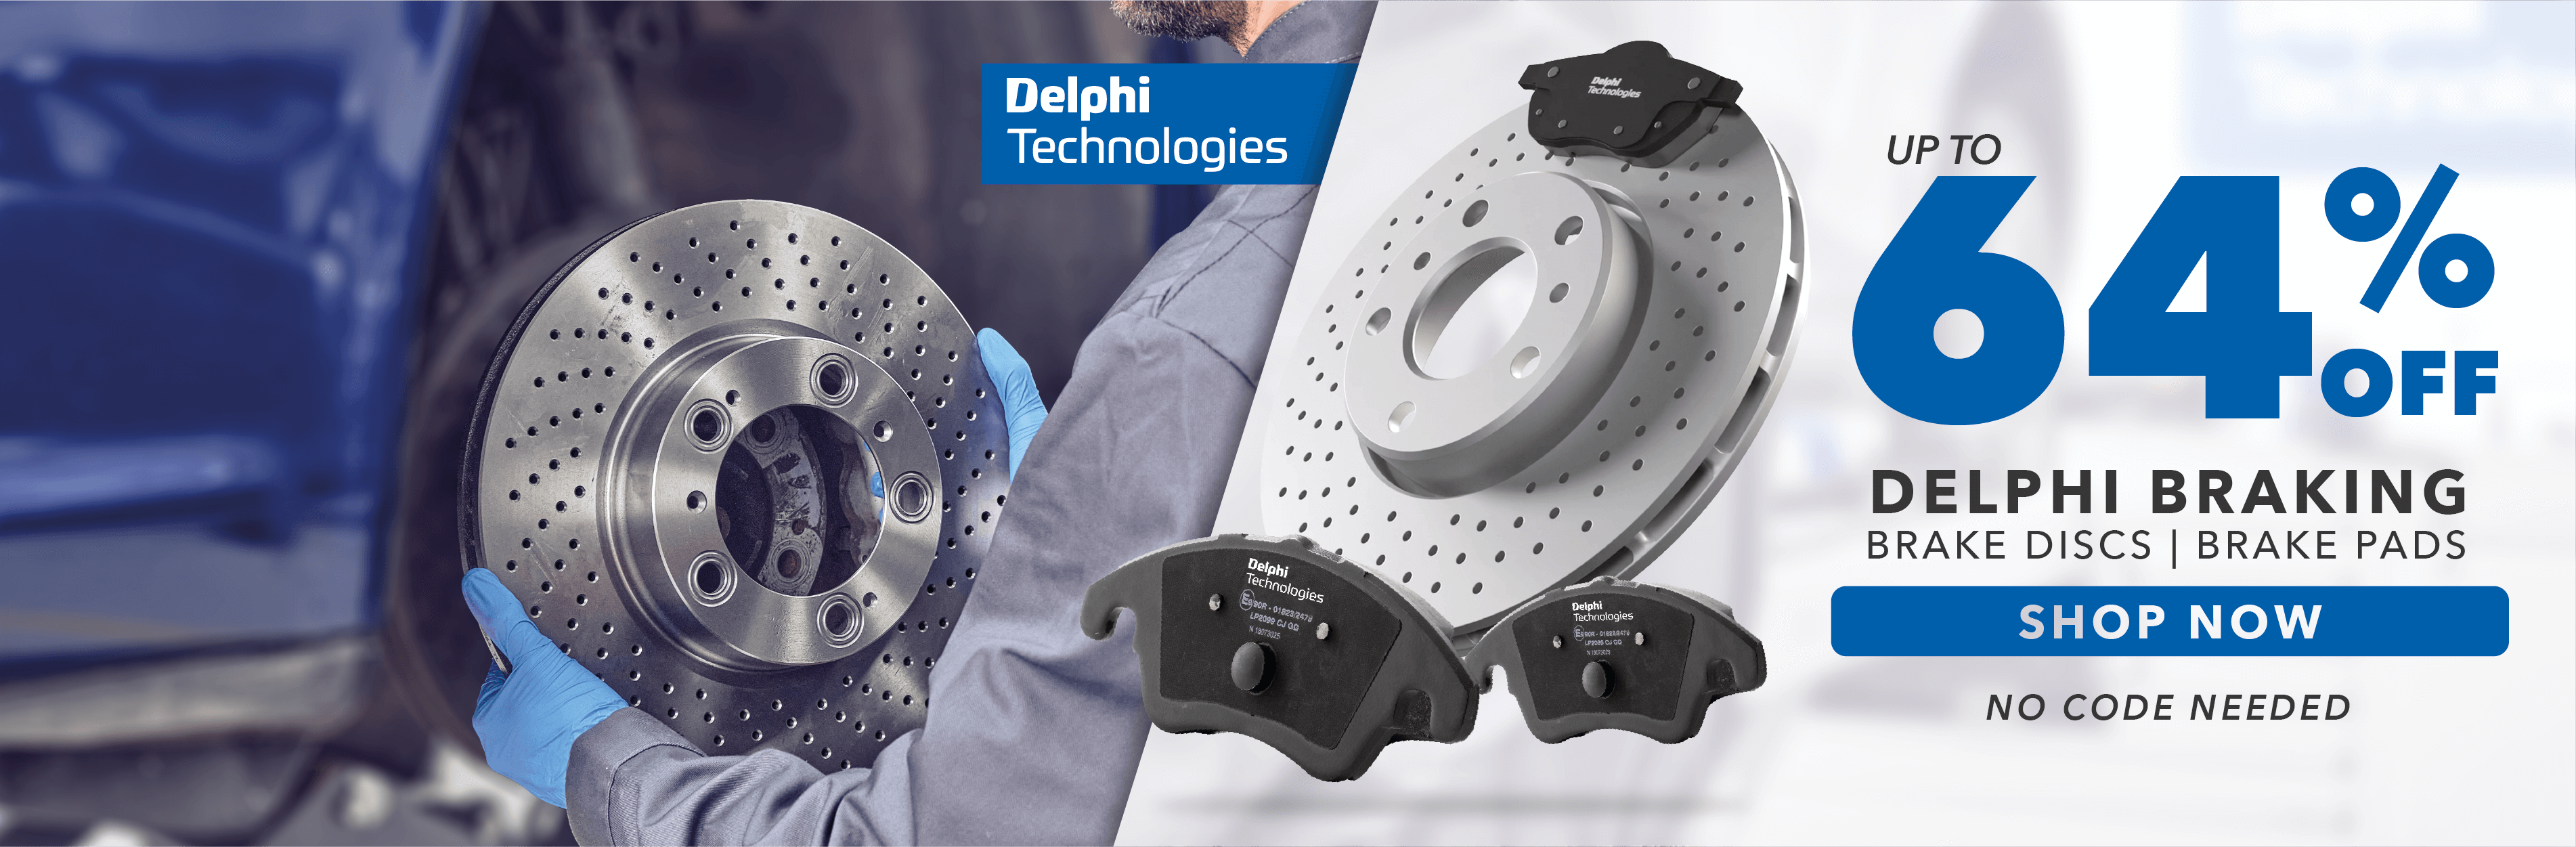 Save up to 64% on Delphi Brake Discs & Pads